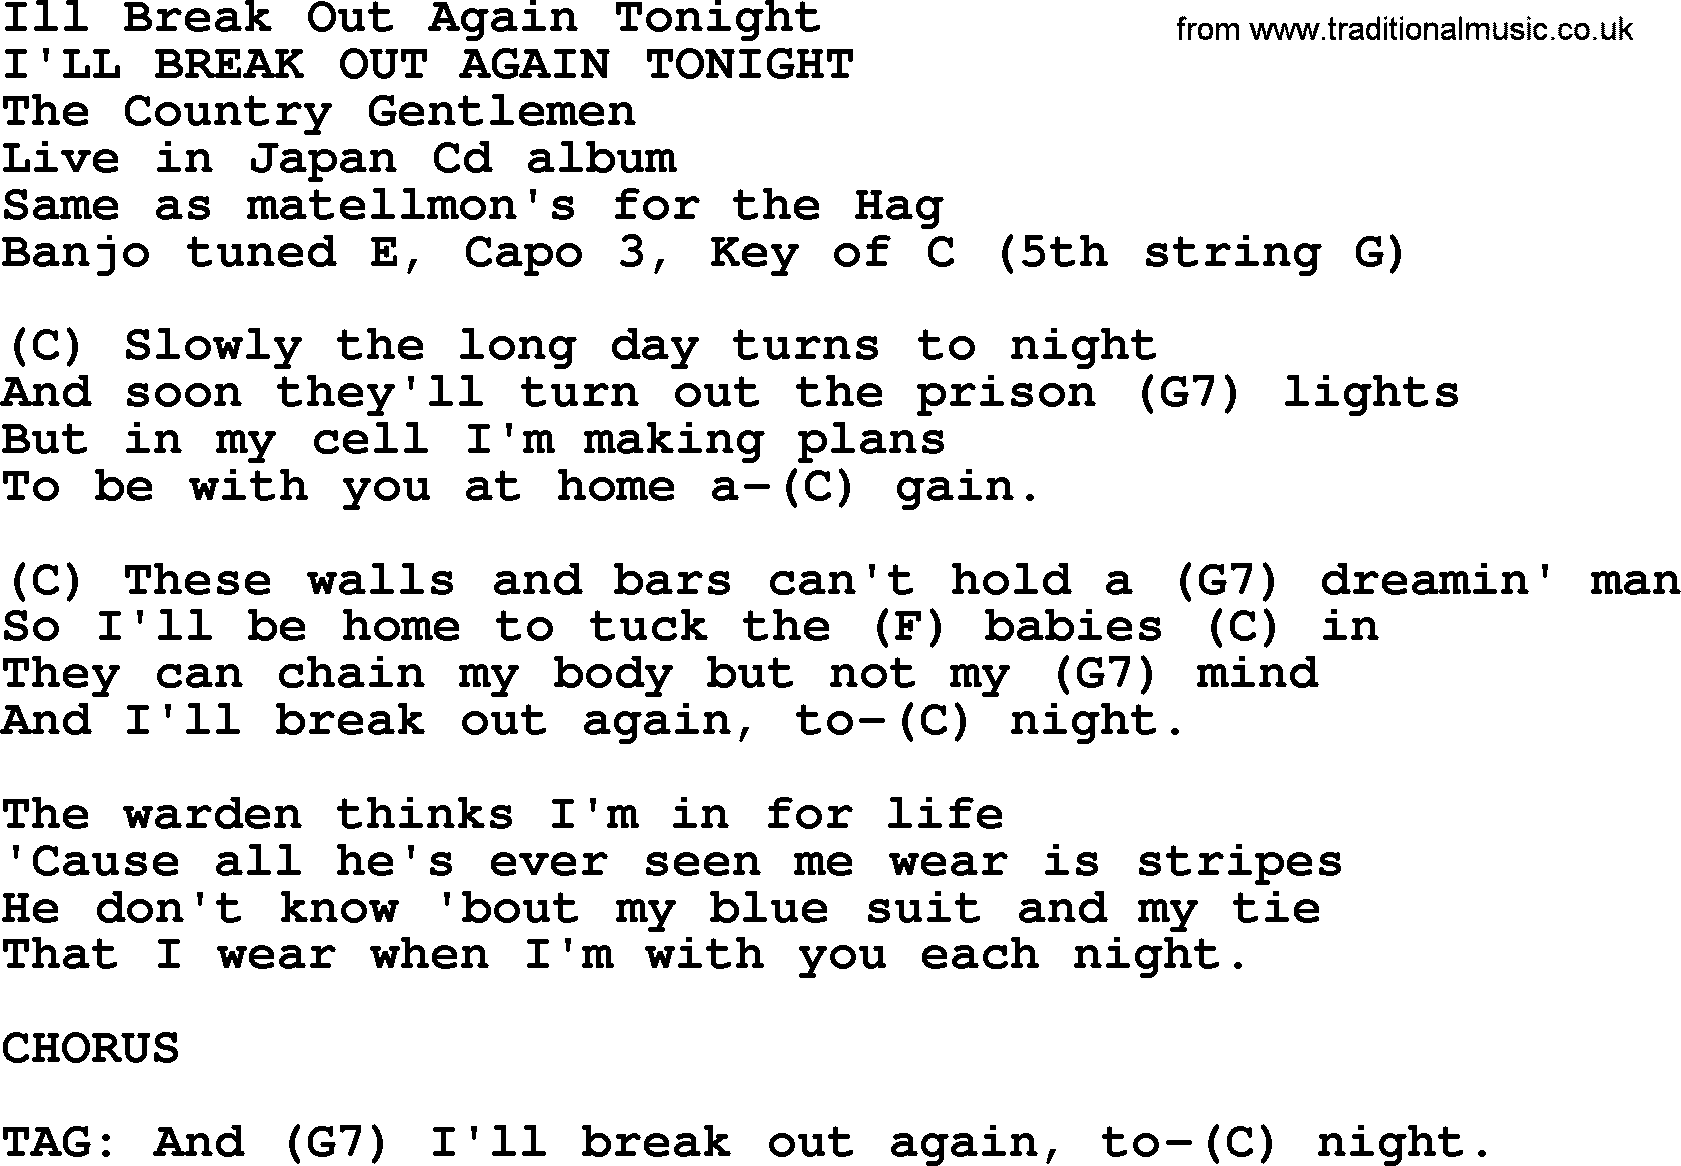 Bluegrass song: Ill Break Out Again Tonight, lyrics and chords